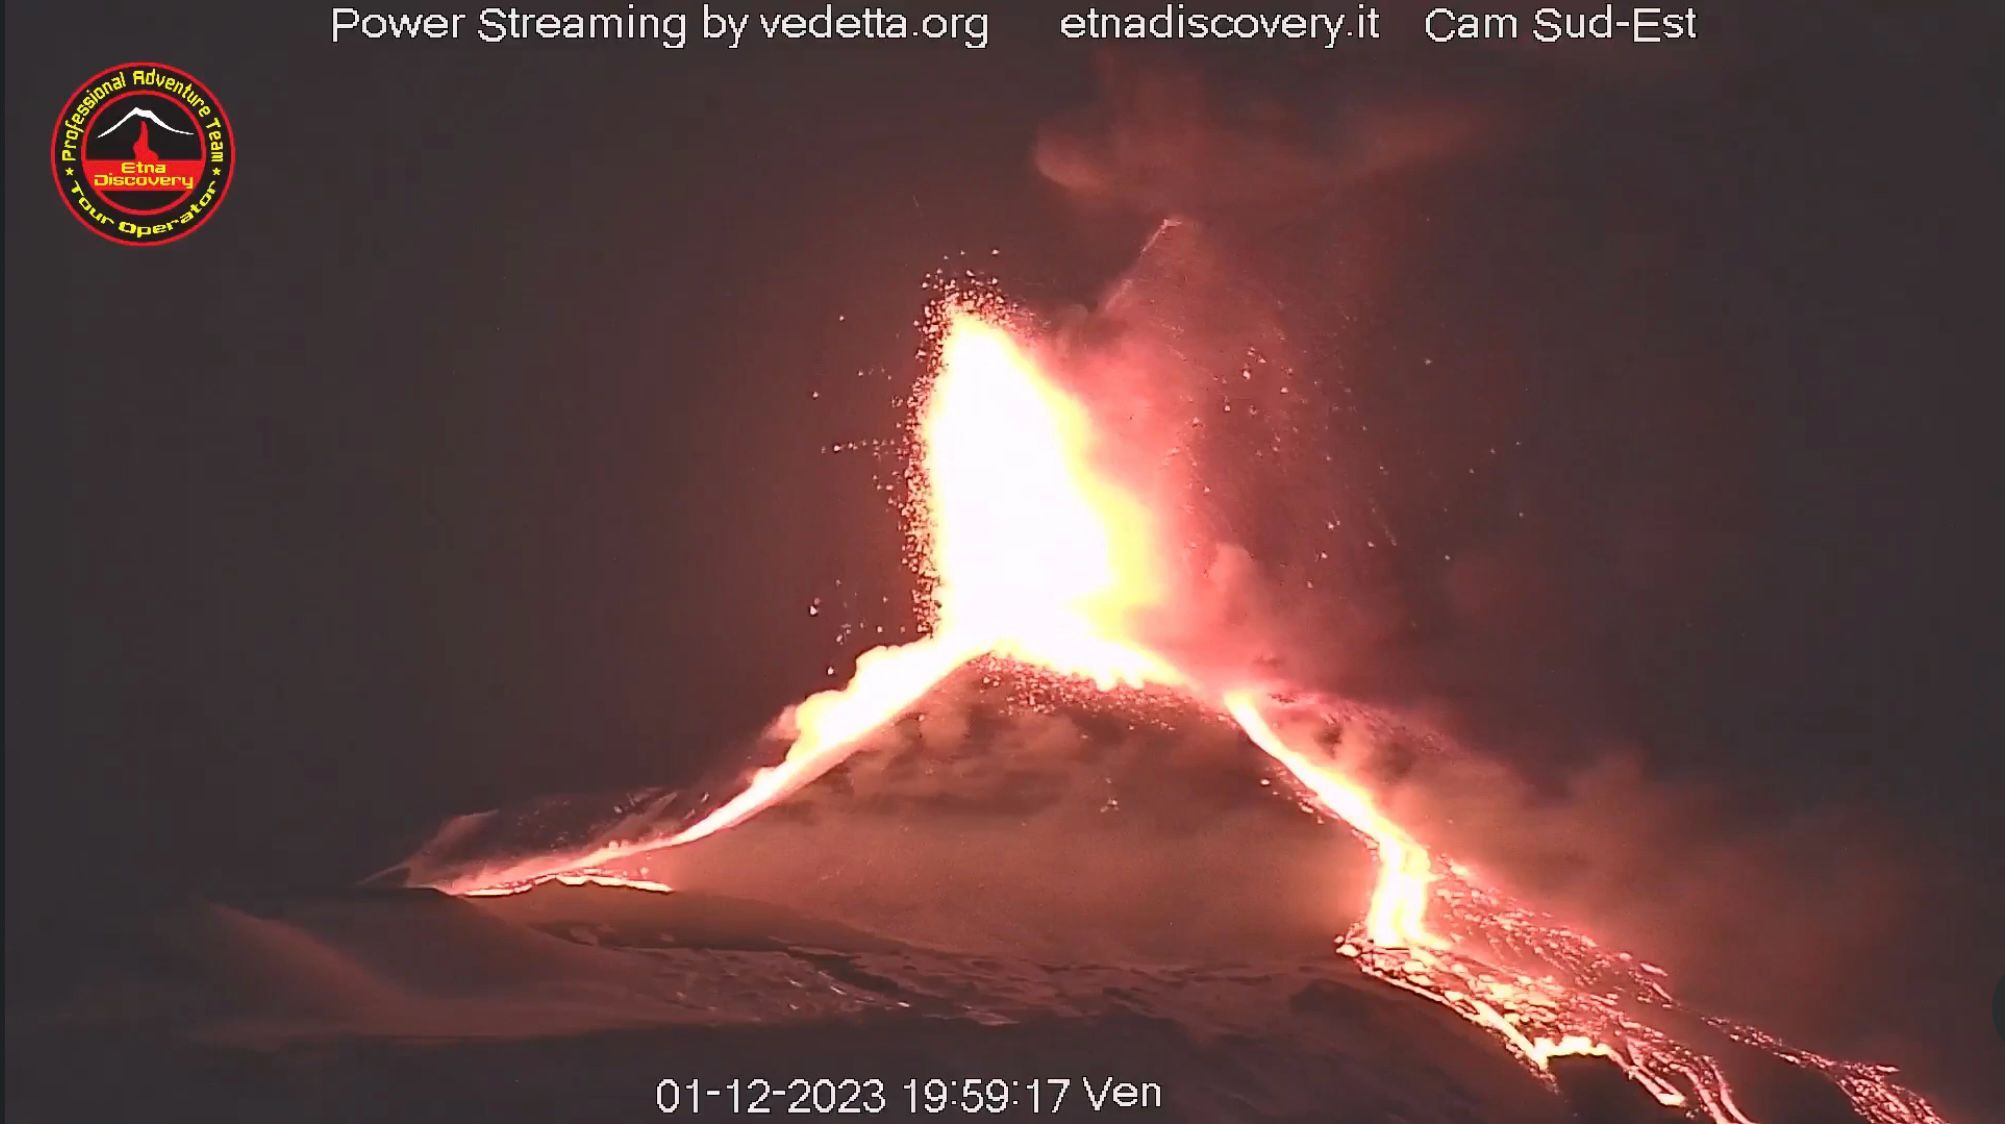 Lava fountains from Etna on 1 Dec 2023 evening (image: etnadiscovery.it webcam)